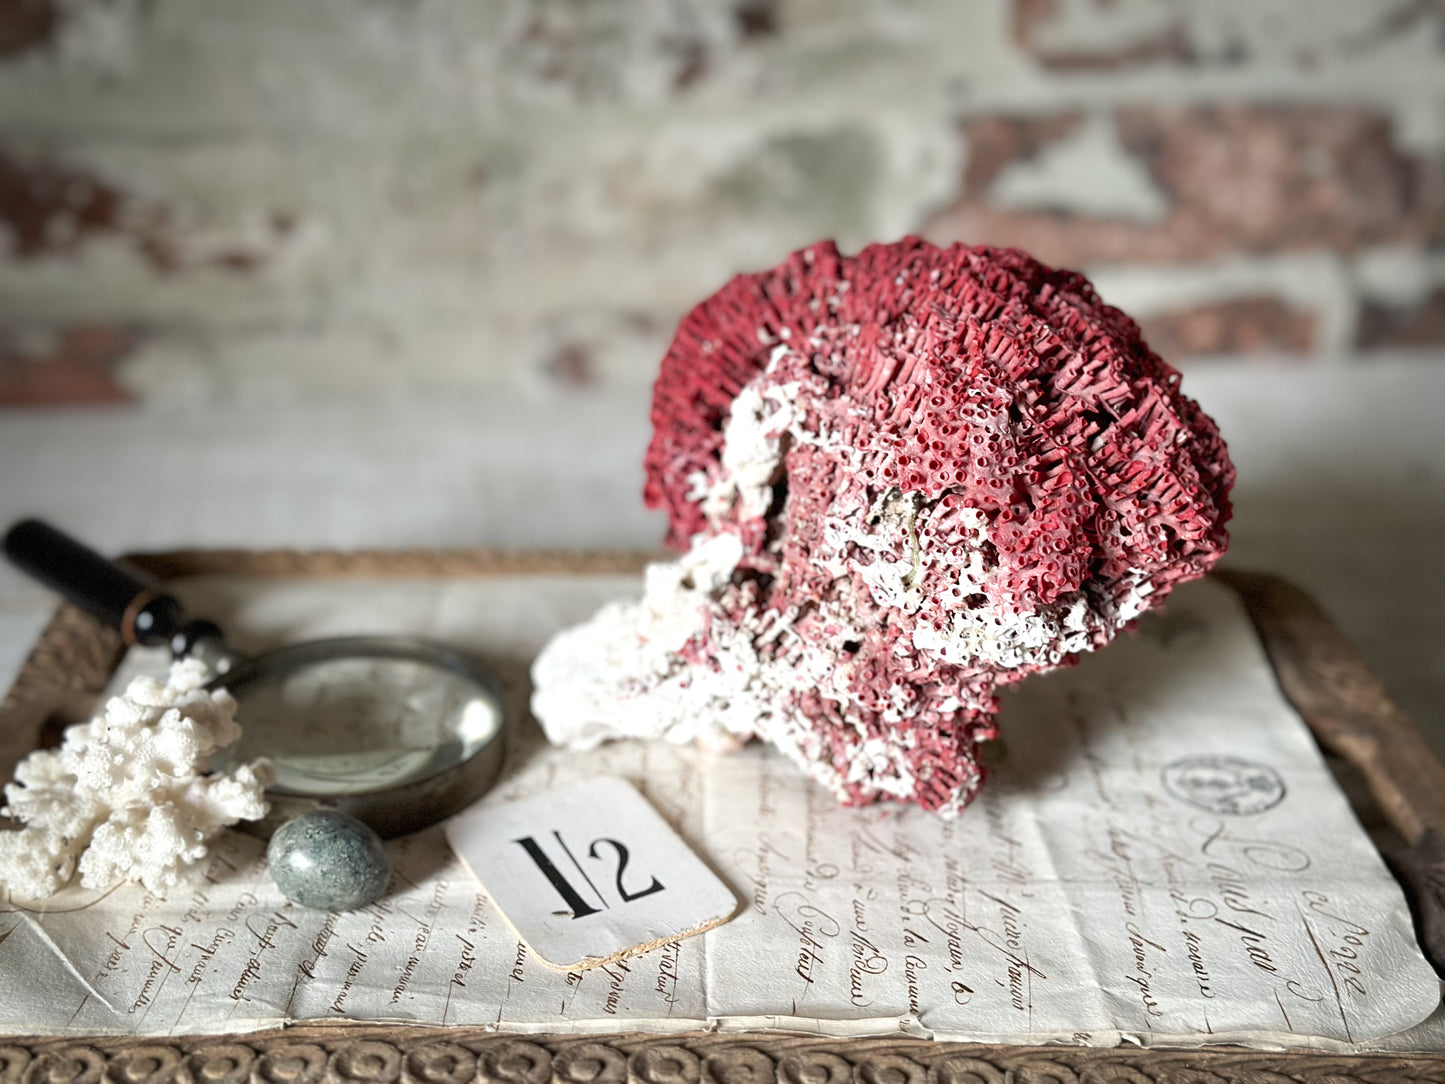 A beautiful large rare piece of natural sea coral in dark pink